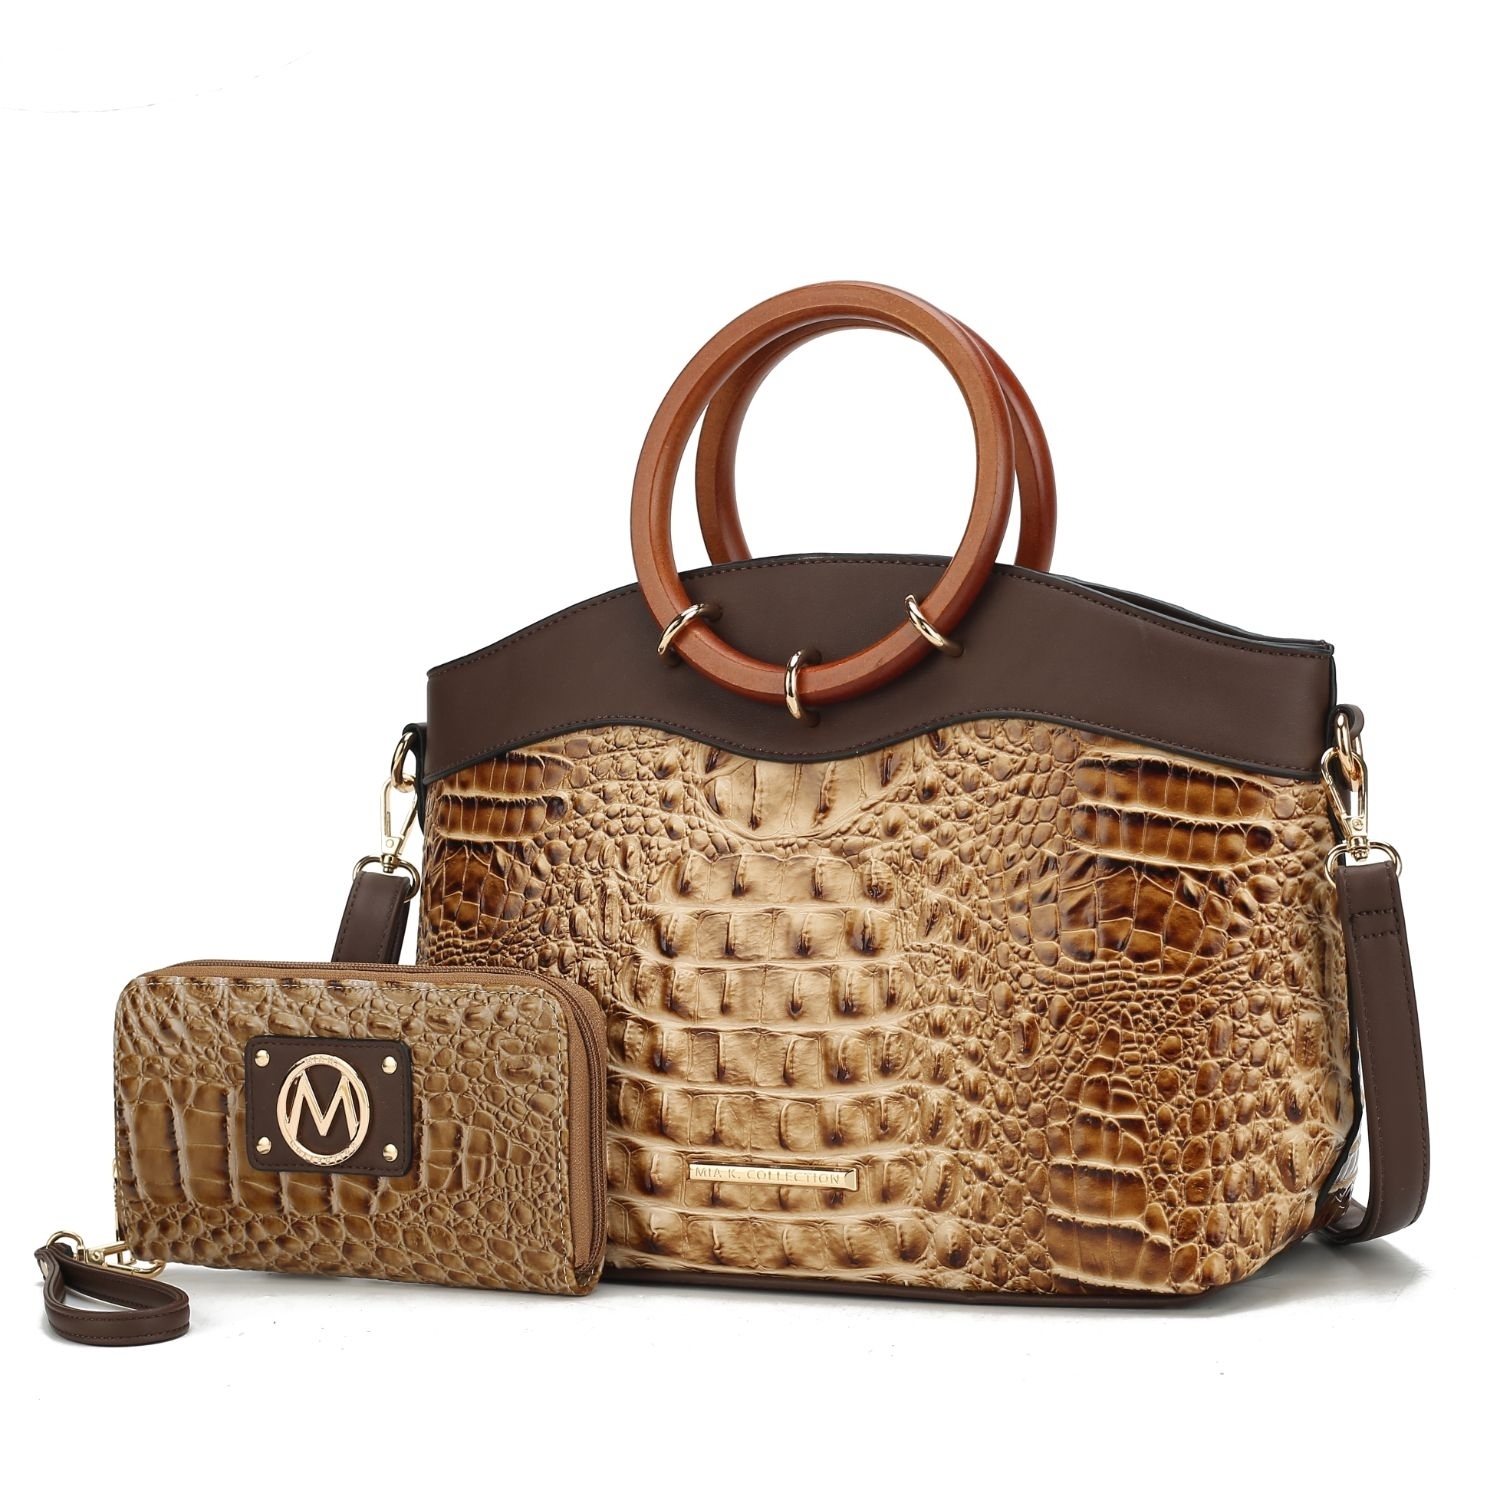 MKF Collection Phoebe Faux Crocodile-Embossed Vegan Leather Women's Tote With Wristlet Wallet Bag - 2 Pieces By Mia K - Taupe